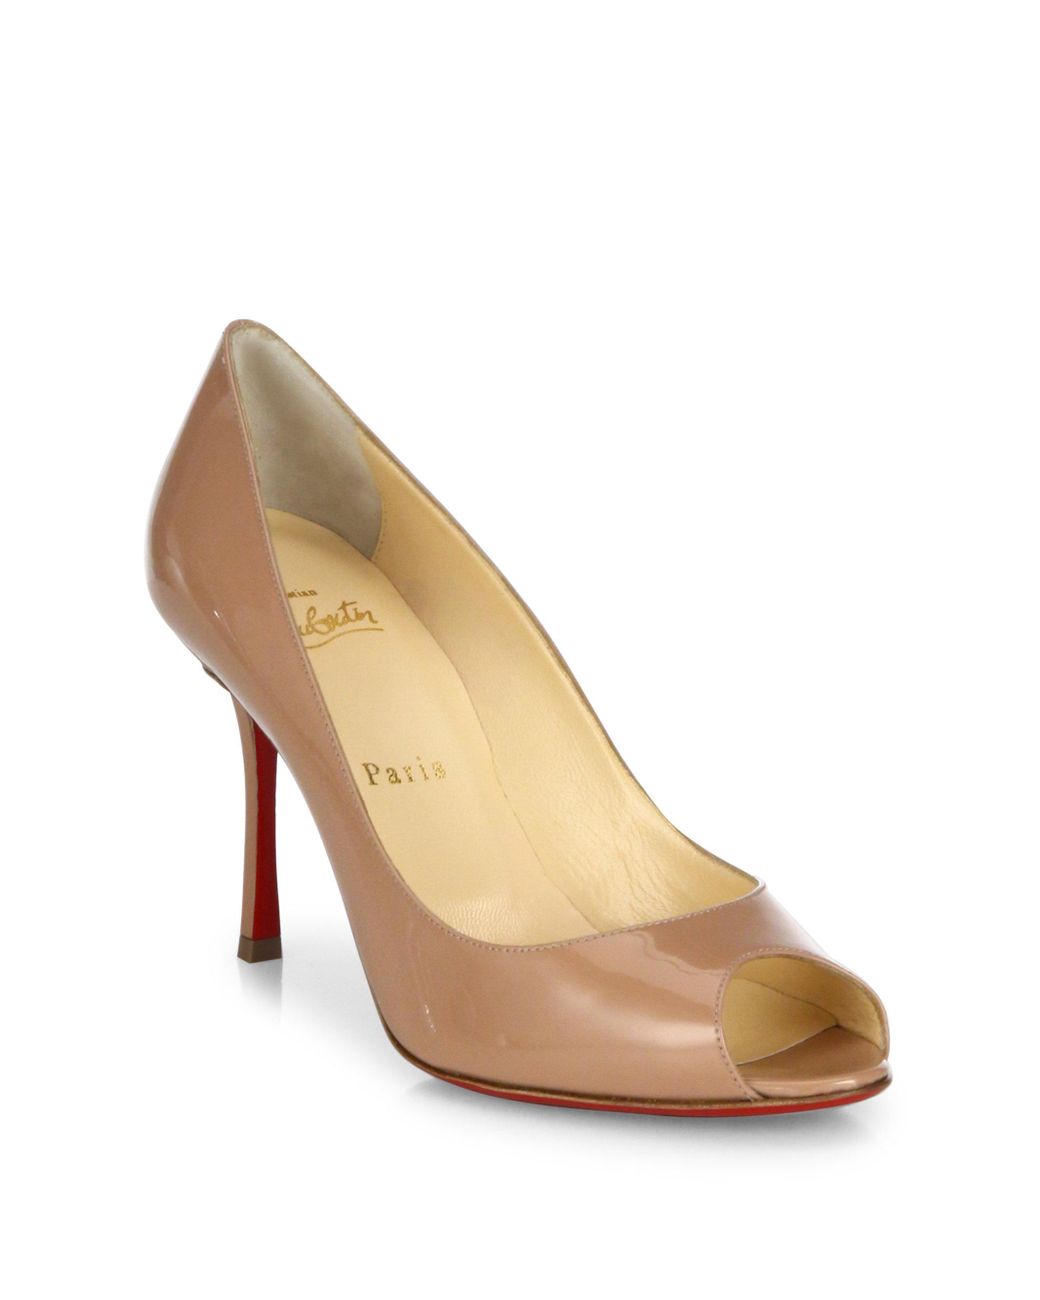 Christian Louboutin Yootish 85 Patent Leather Peep Toe Pumps in Natural |  Lyst